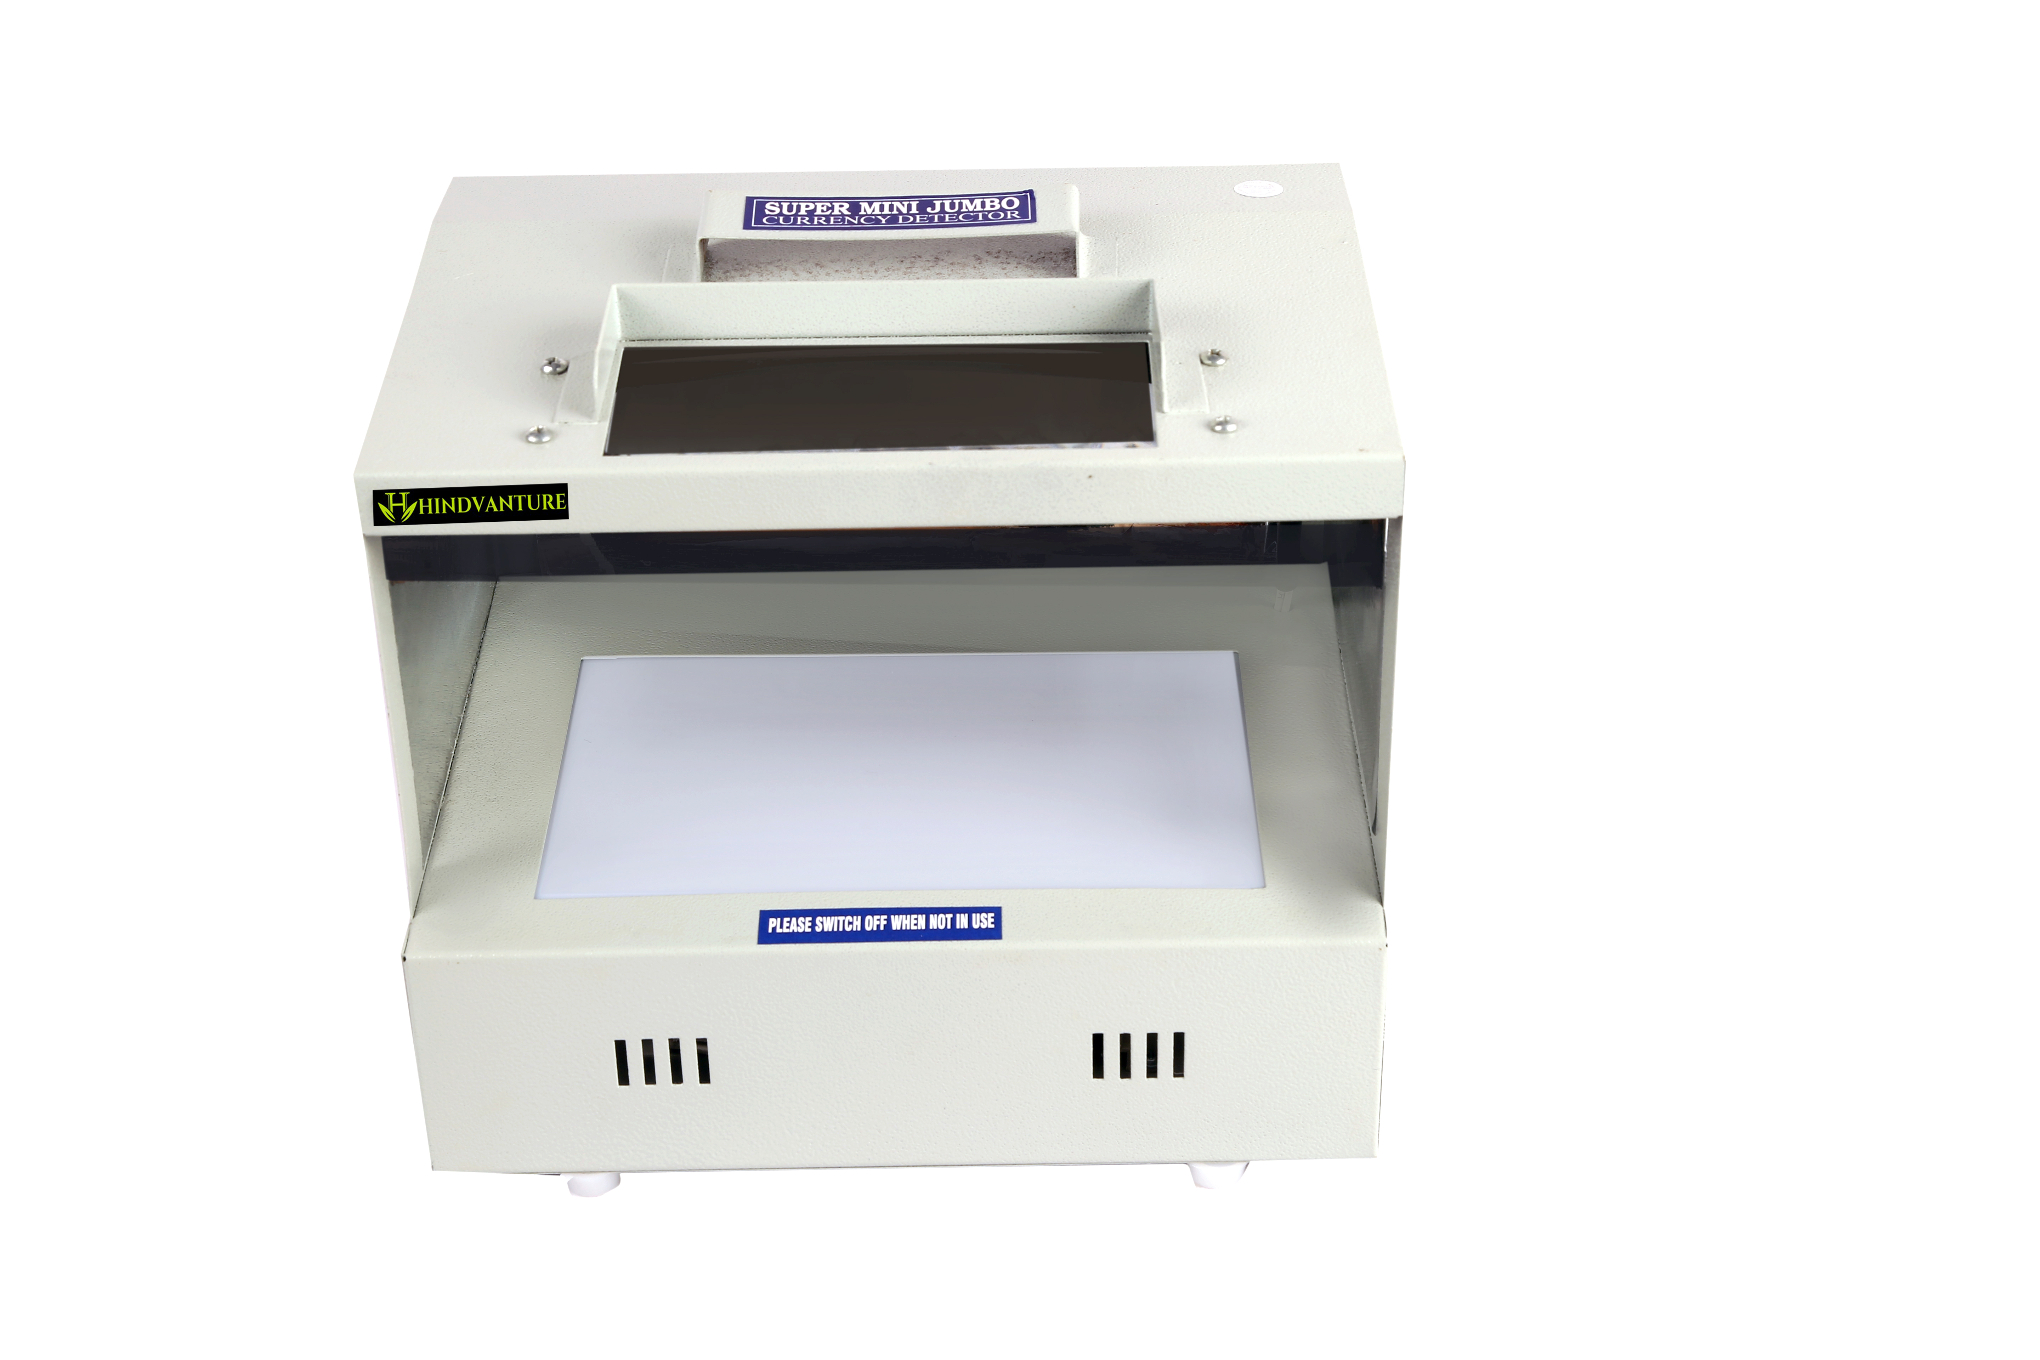  Currency Counting Machines (Money Bill Counter HV - 131  807 631 0511